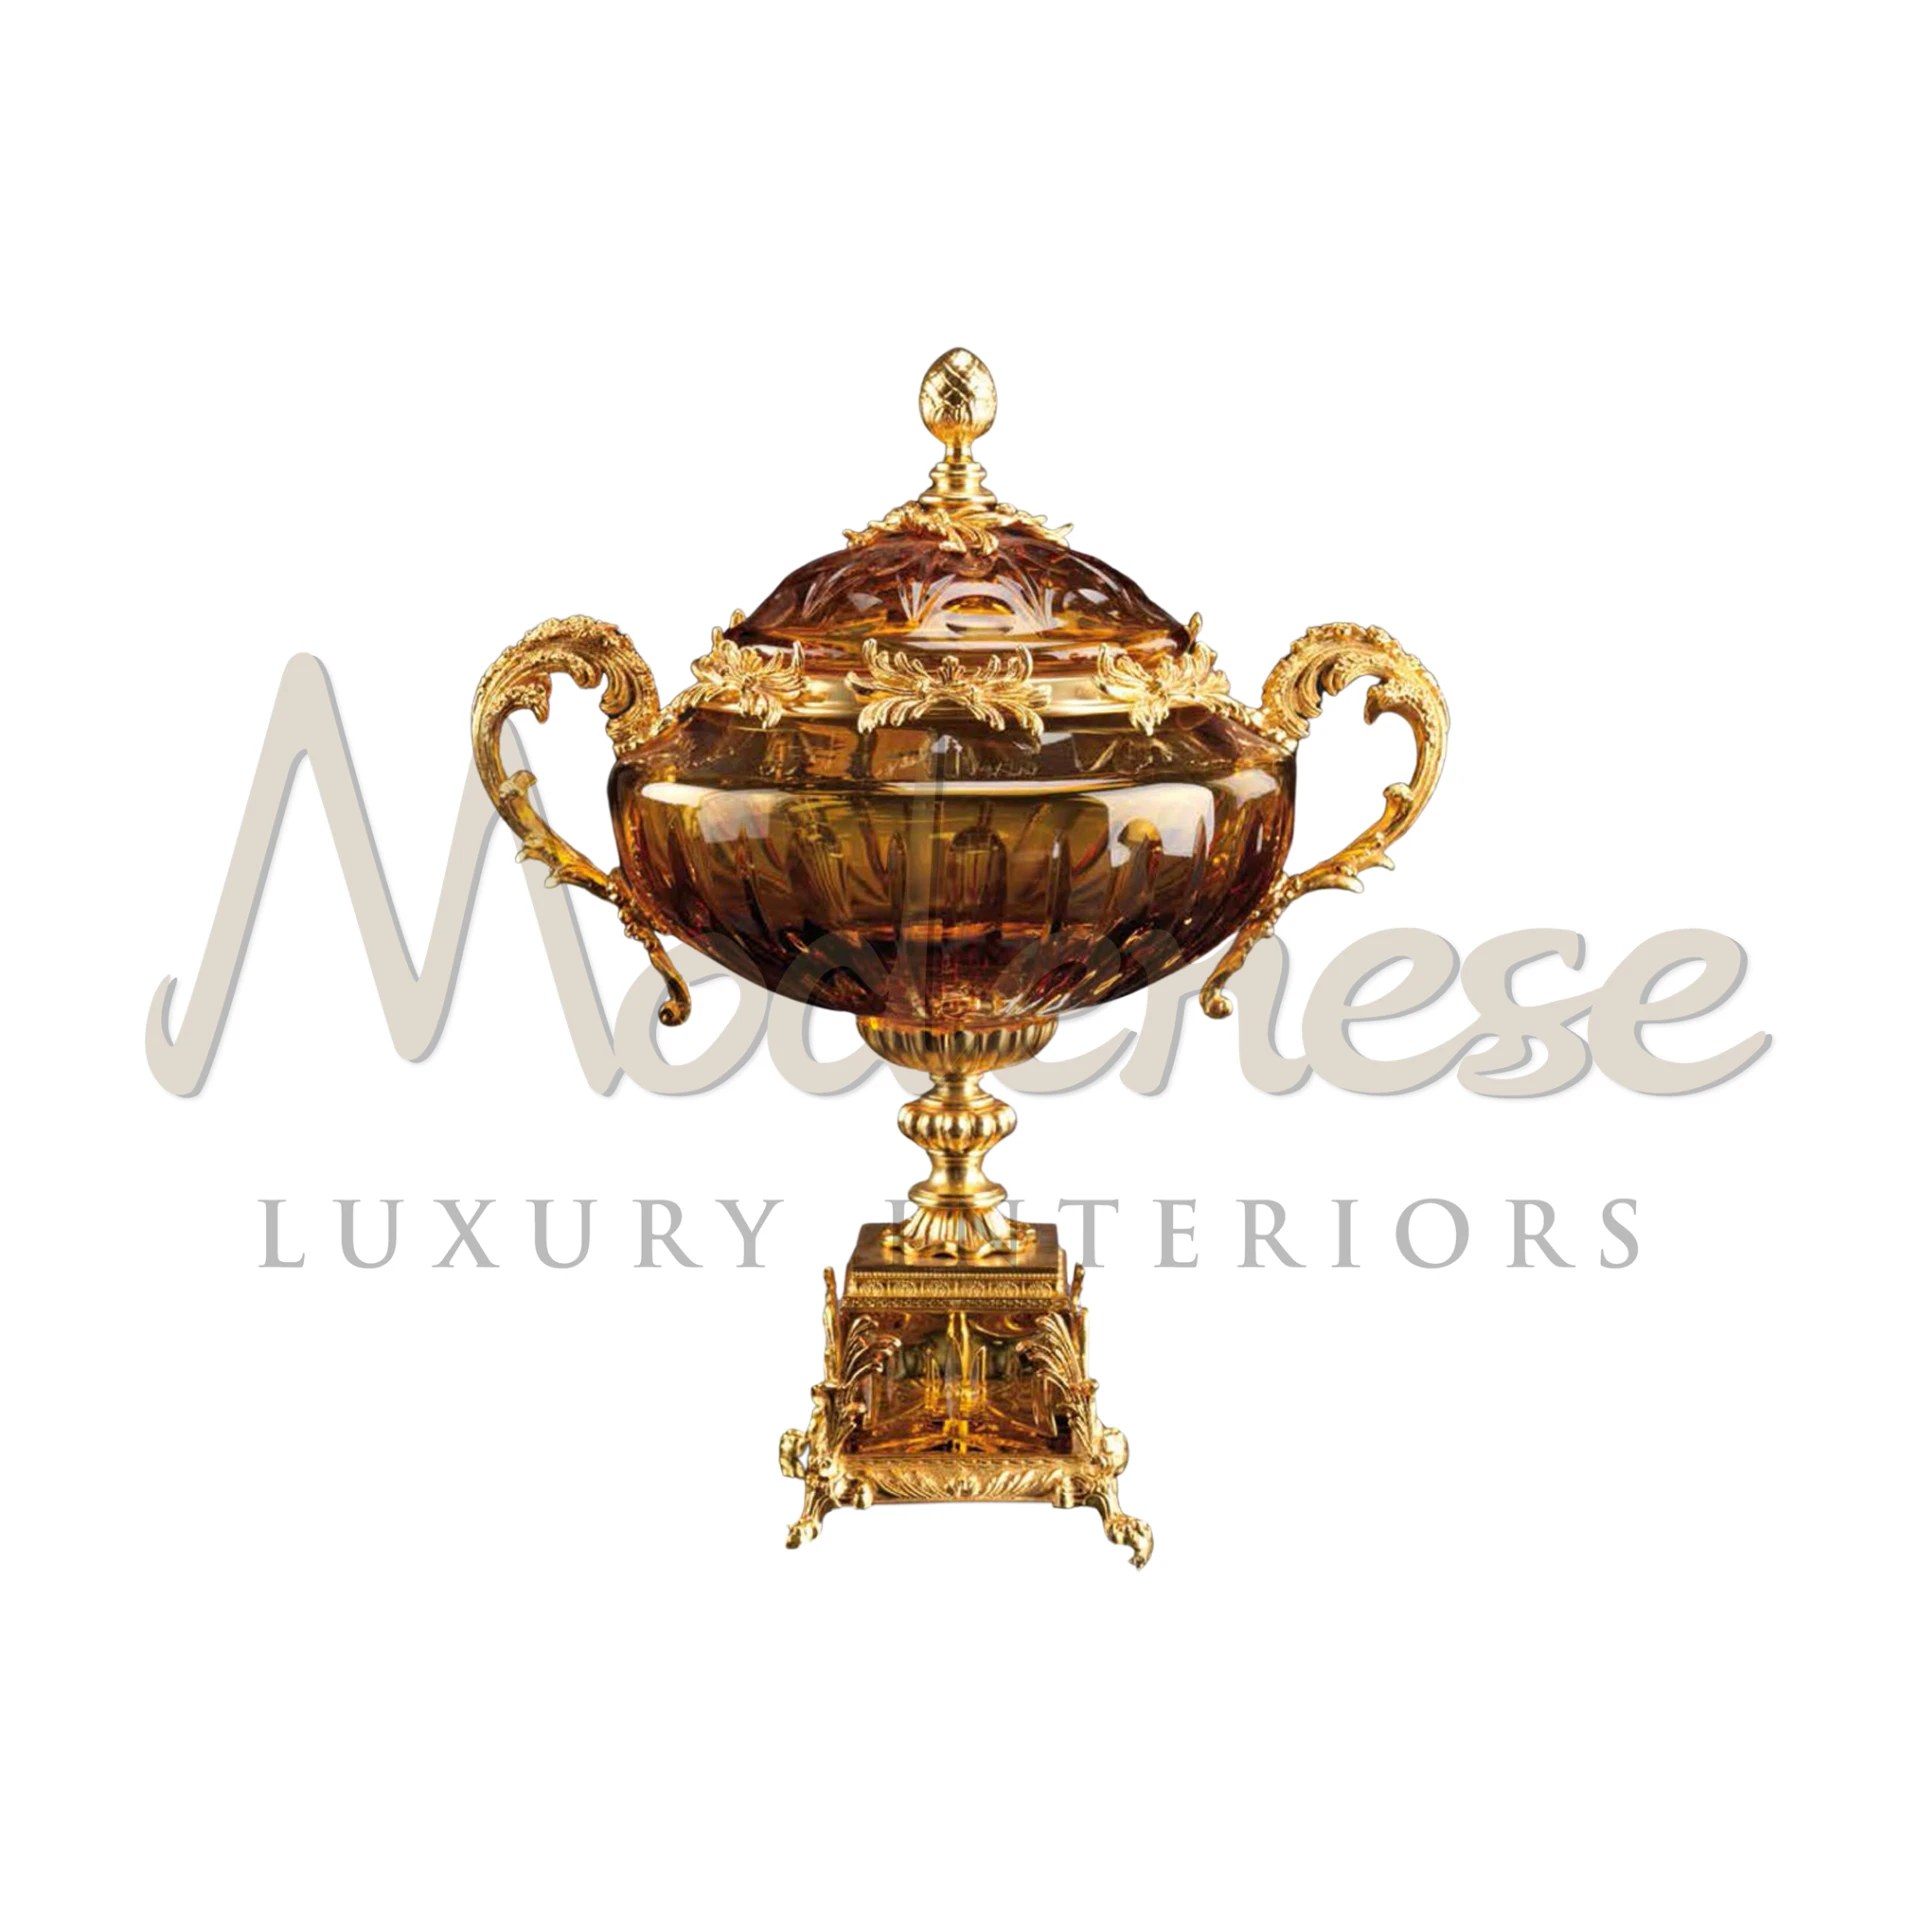 High-quality Luxury Crystal Vase with etched designs and gemstone accents, epitomizing elegance in classic and baroque interiors.